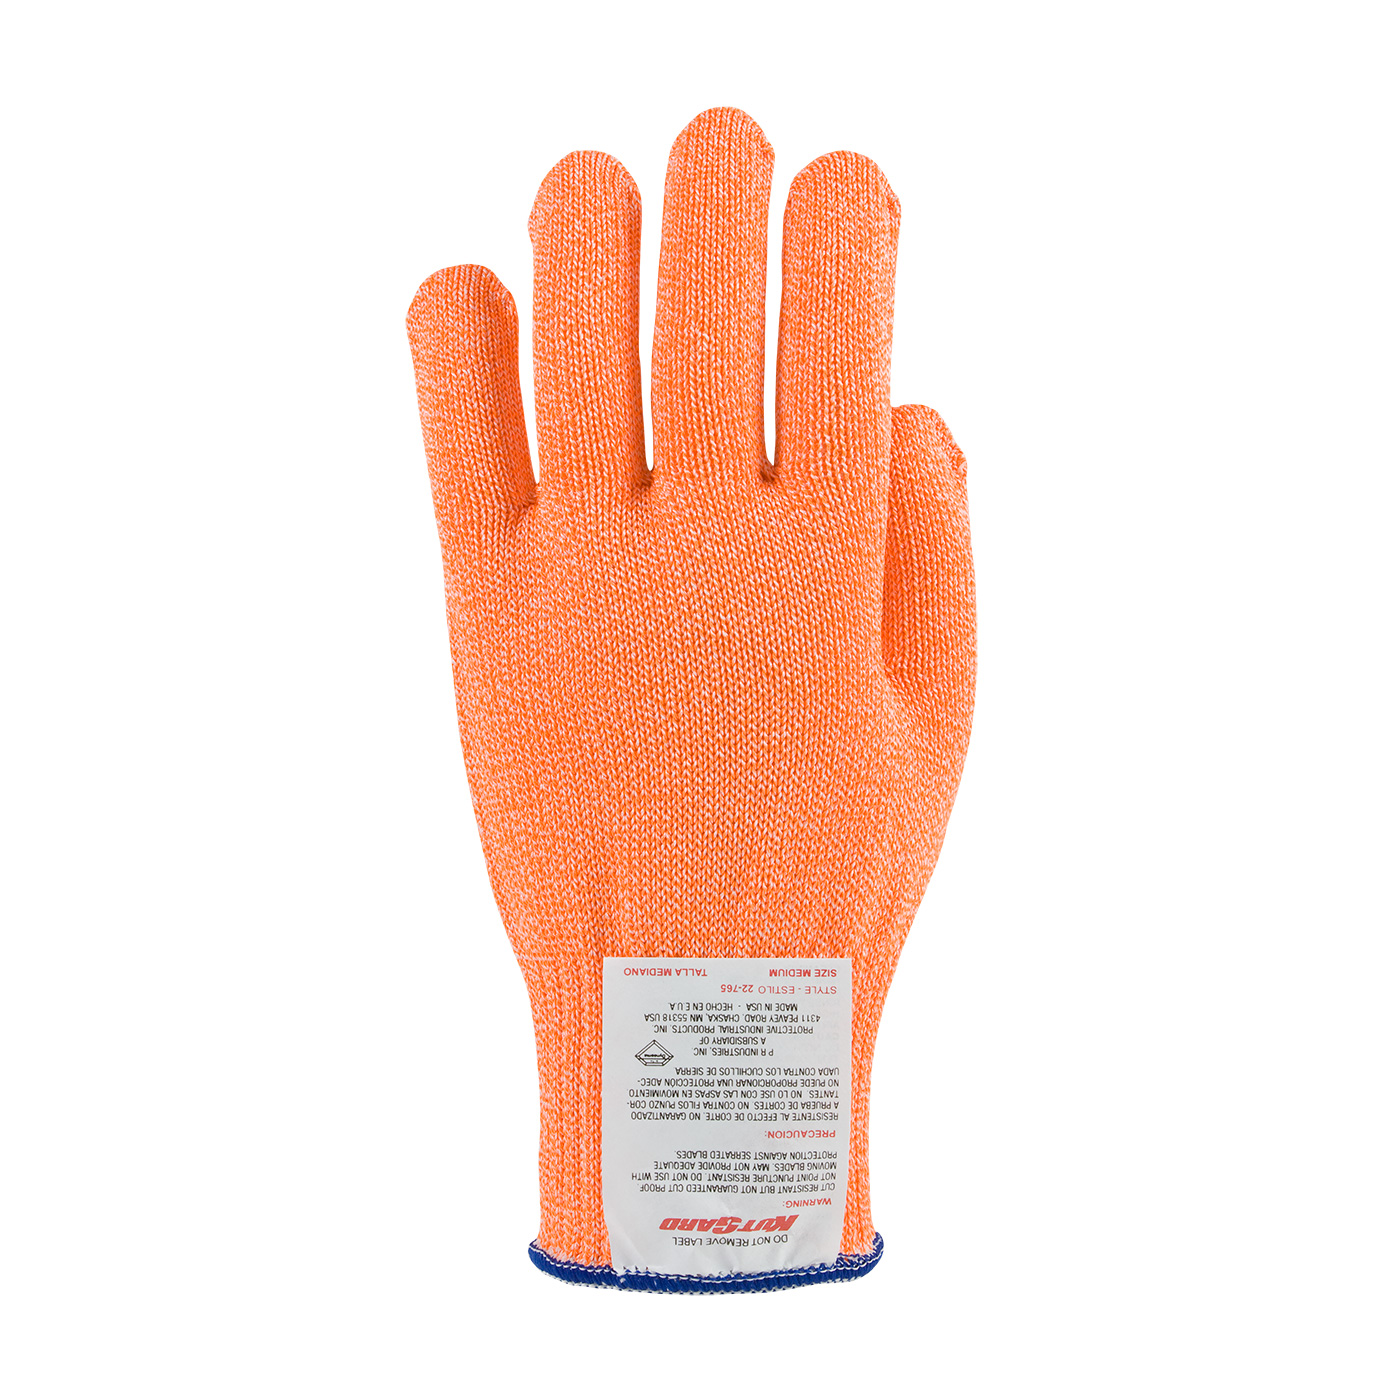 22-760OR PIP® Orange Claw Cover® Seamless Knit Dyneema® Blended Antimicrobial Glove - Medium Weight